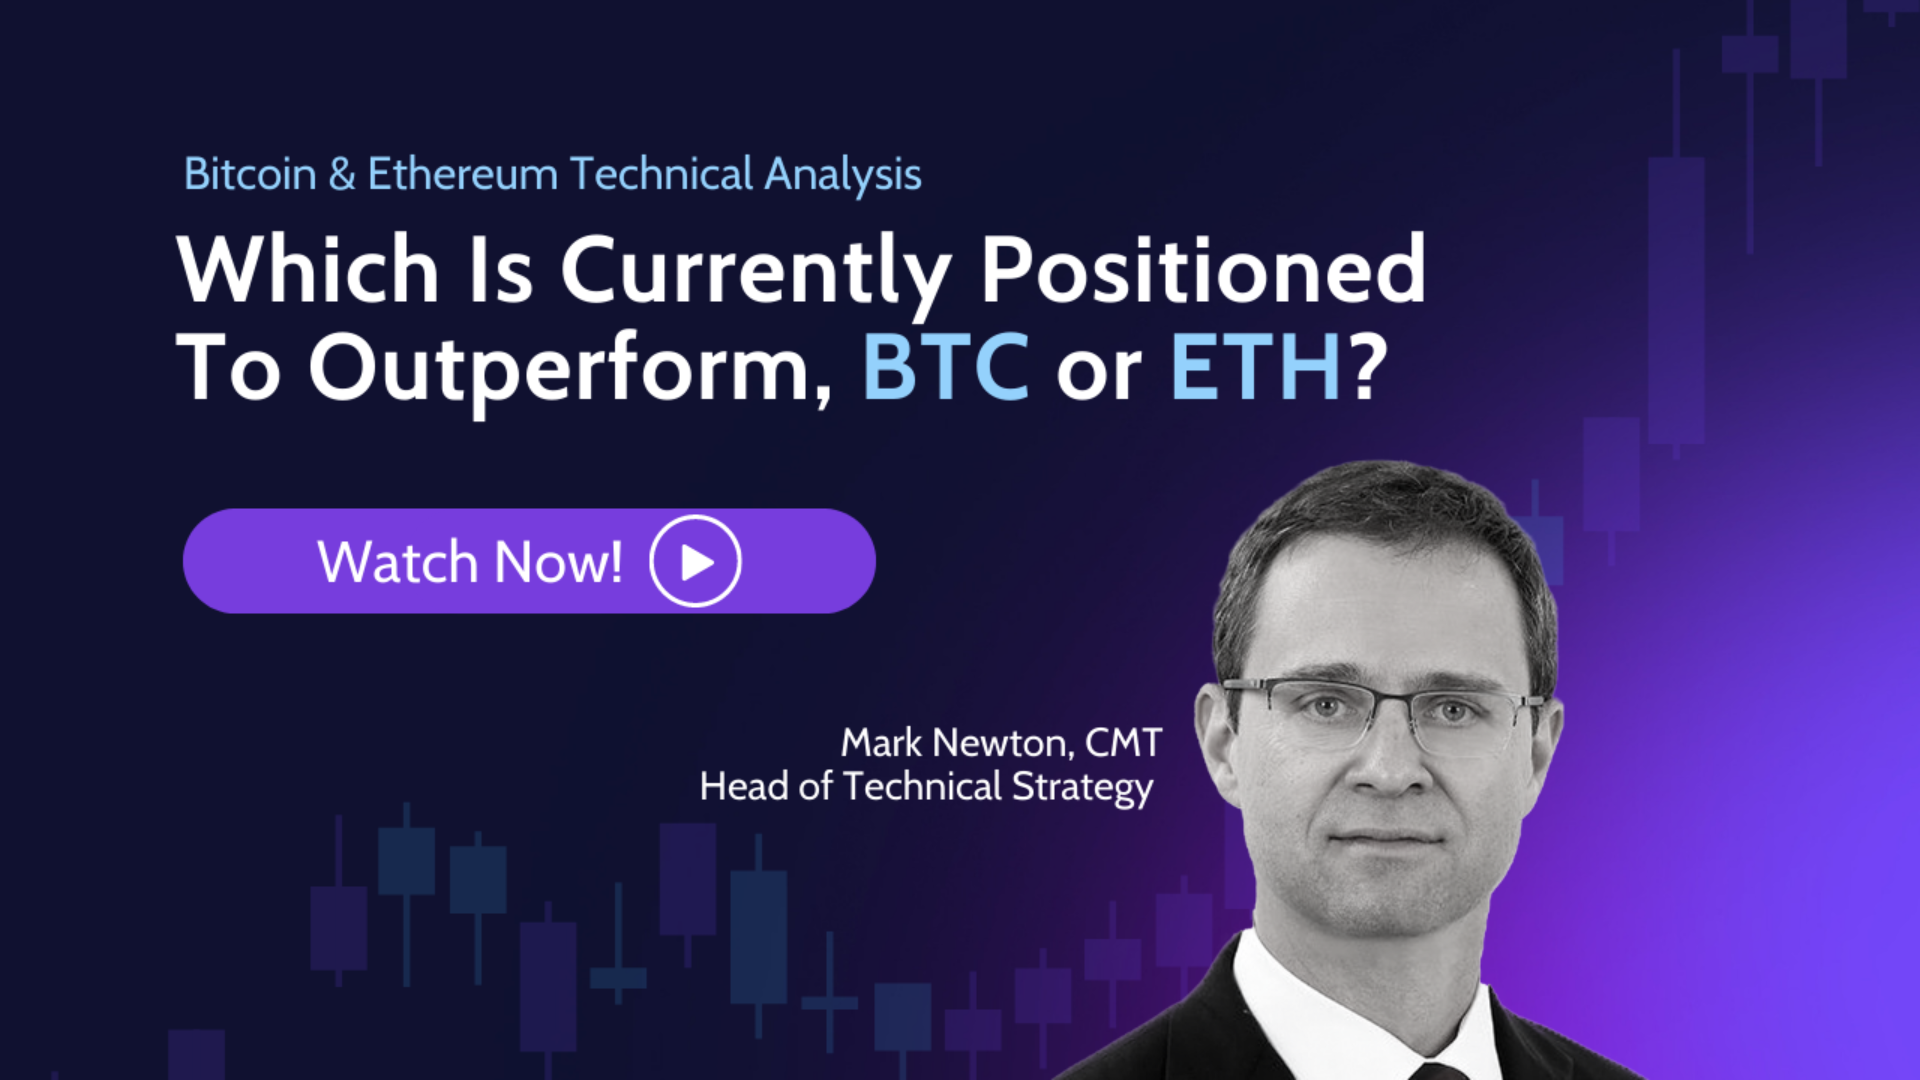 Mark Newton Provides In-Depth Technical Analysis on BTC and ETH